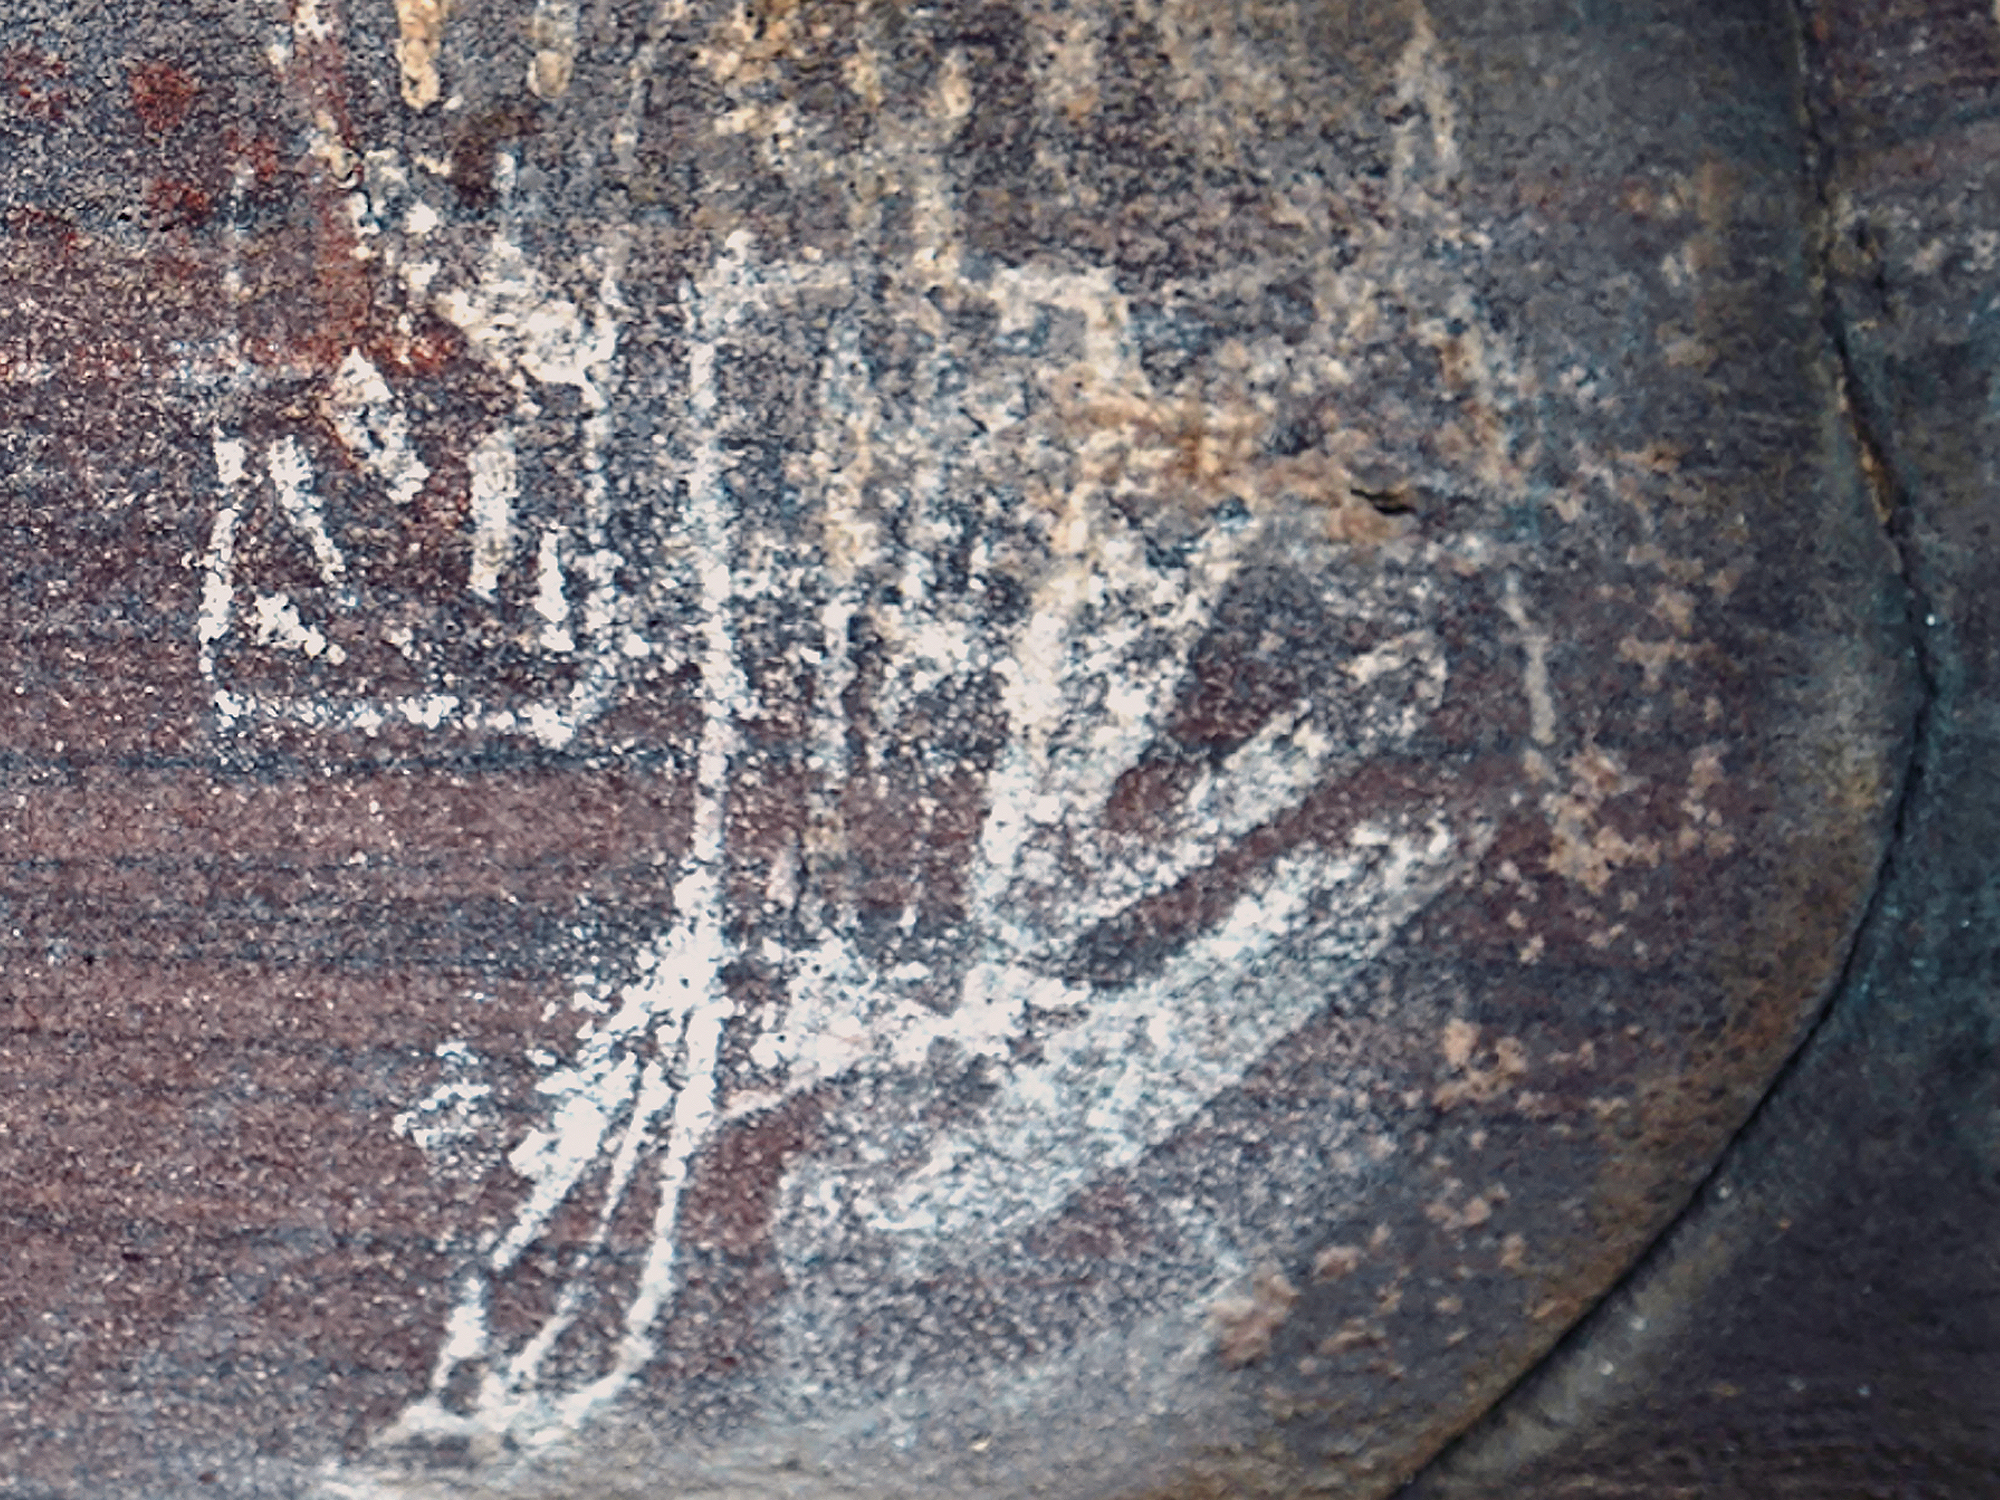 Women Hunters in Indian Rock Art Women Hunters in Indian Rock Art A seated woman in white is holding a rectangular basket with many small fish, probably, she has collected after the fish hunting game.